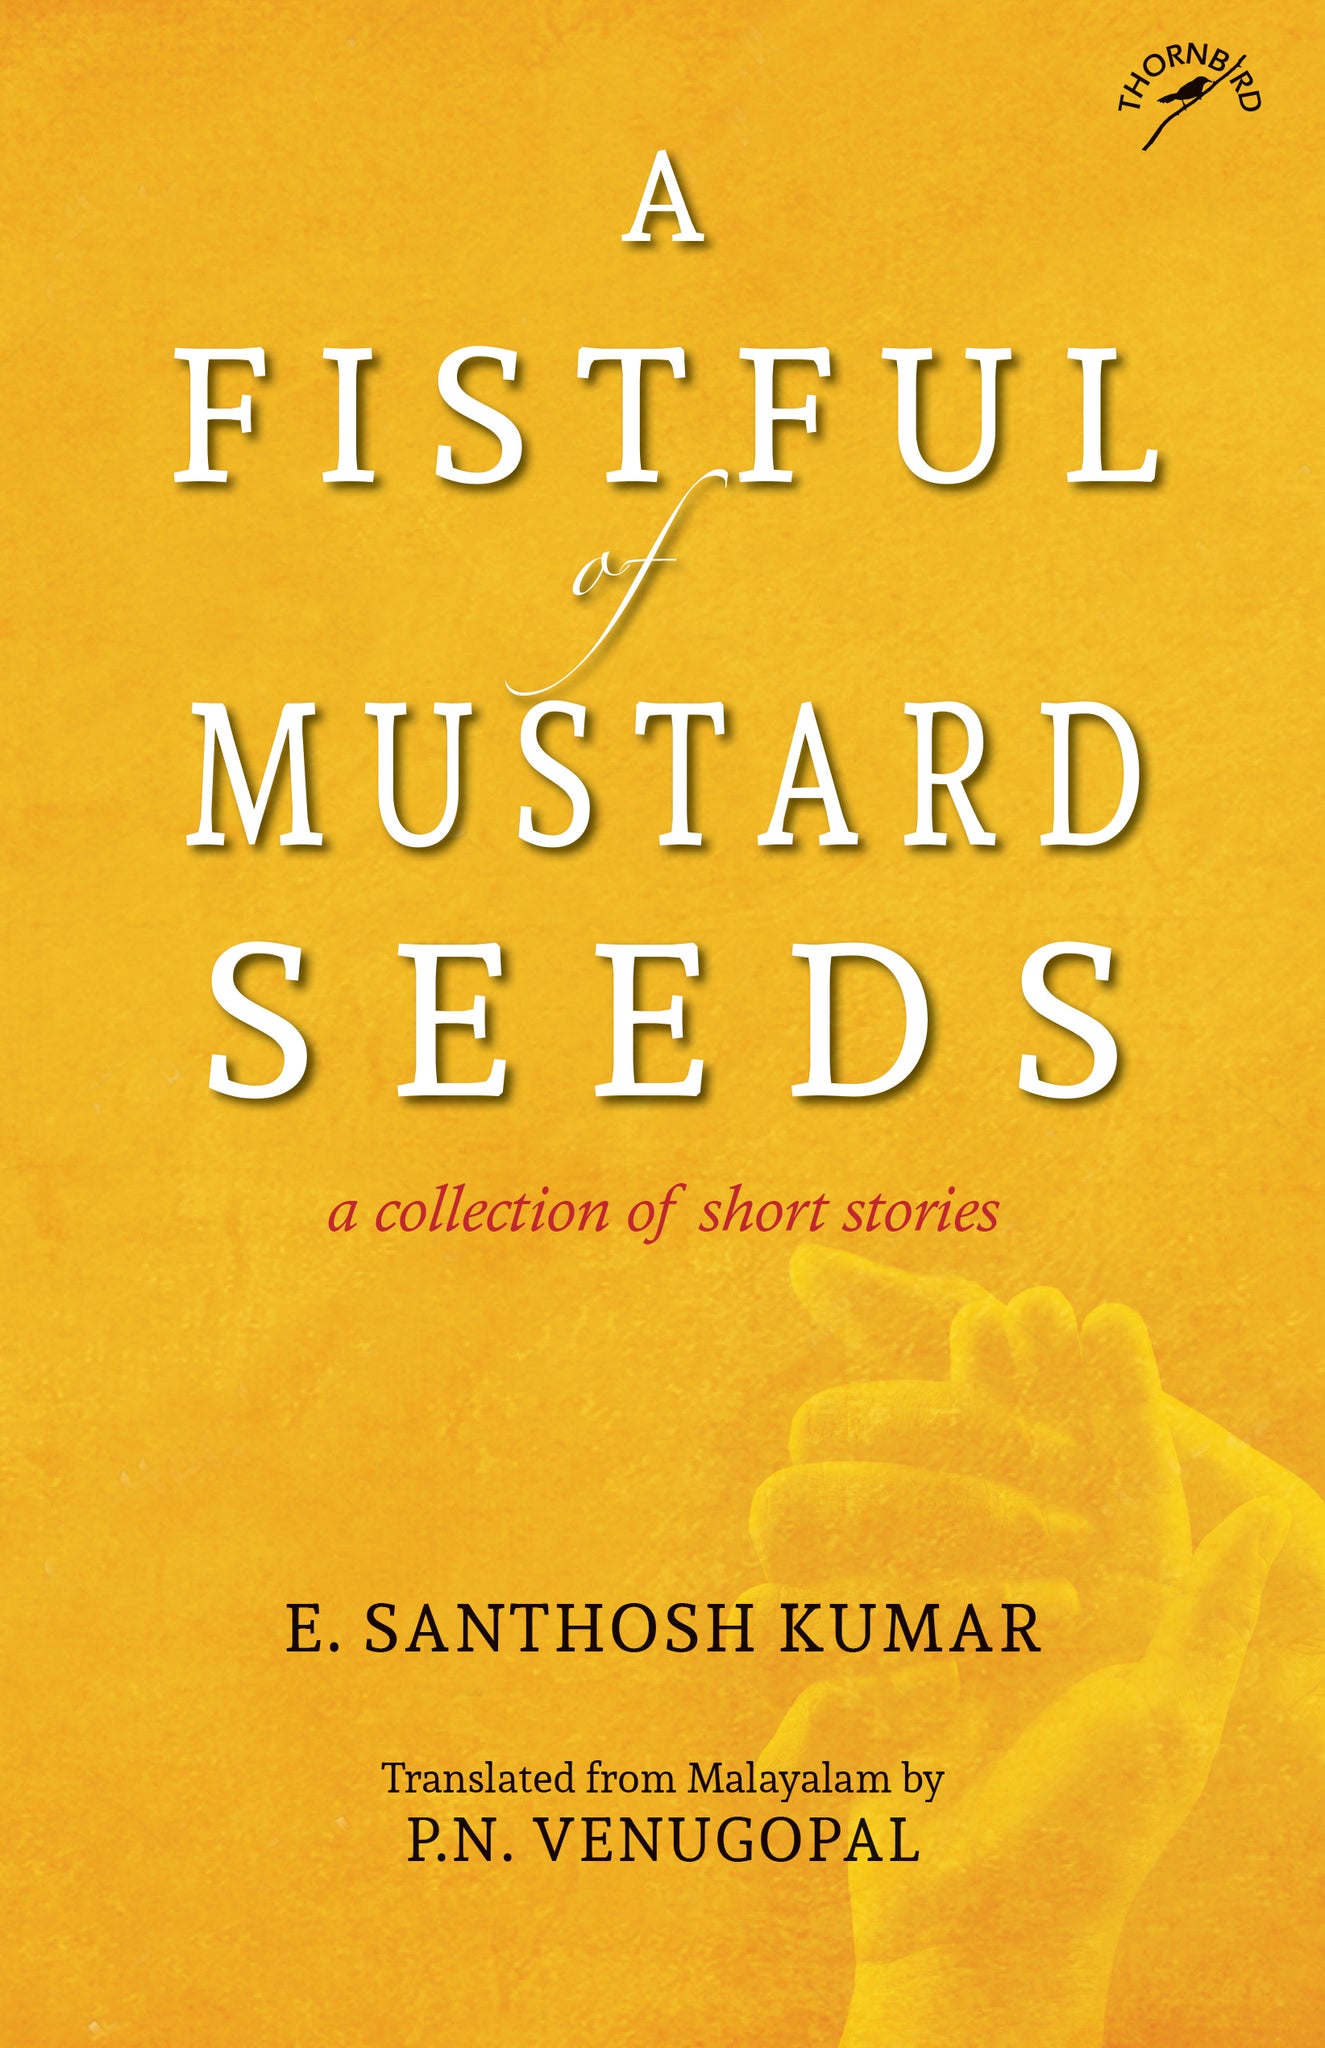 A Fistful of Mustard Seeds: A Collection of Short Stories (F.B)